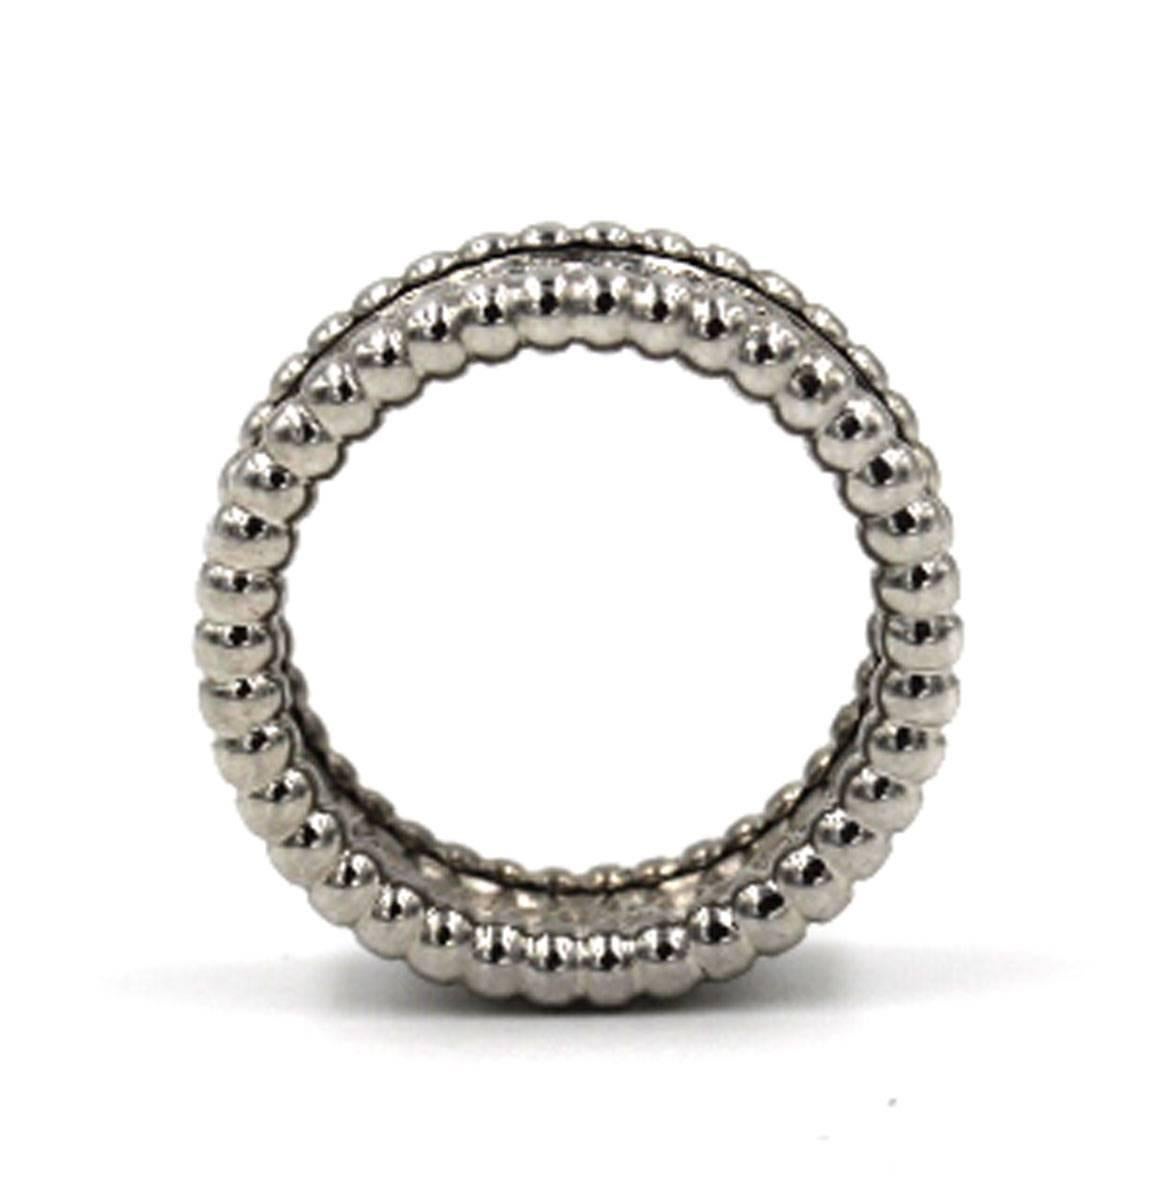 This timeless diamond eternity band from designer Van Cleef & Arpels is part of the Perlee collection.  The ring is size 52 (US size 6), signed VCA, and numbered JB388349.  Retail price is $15,500.